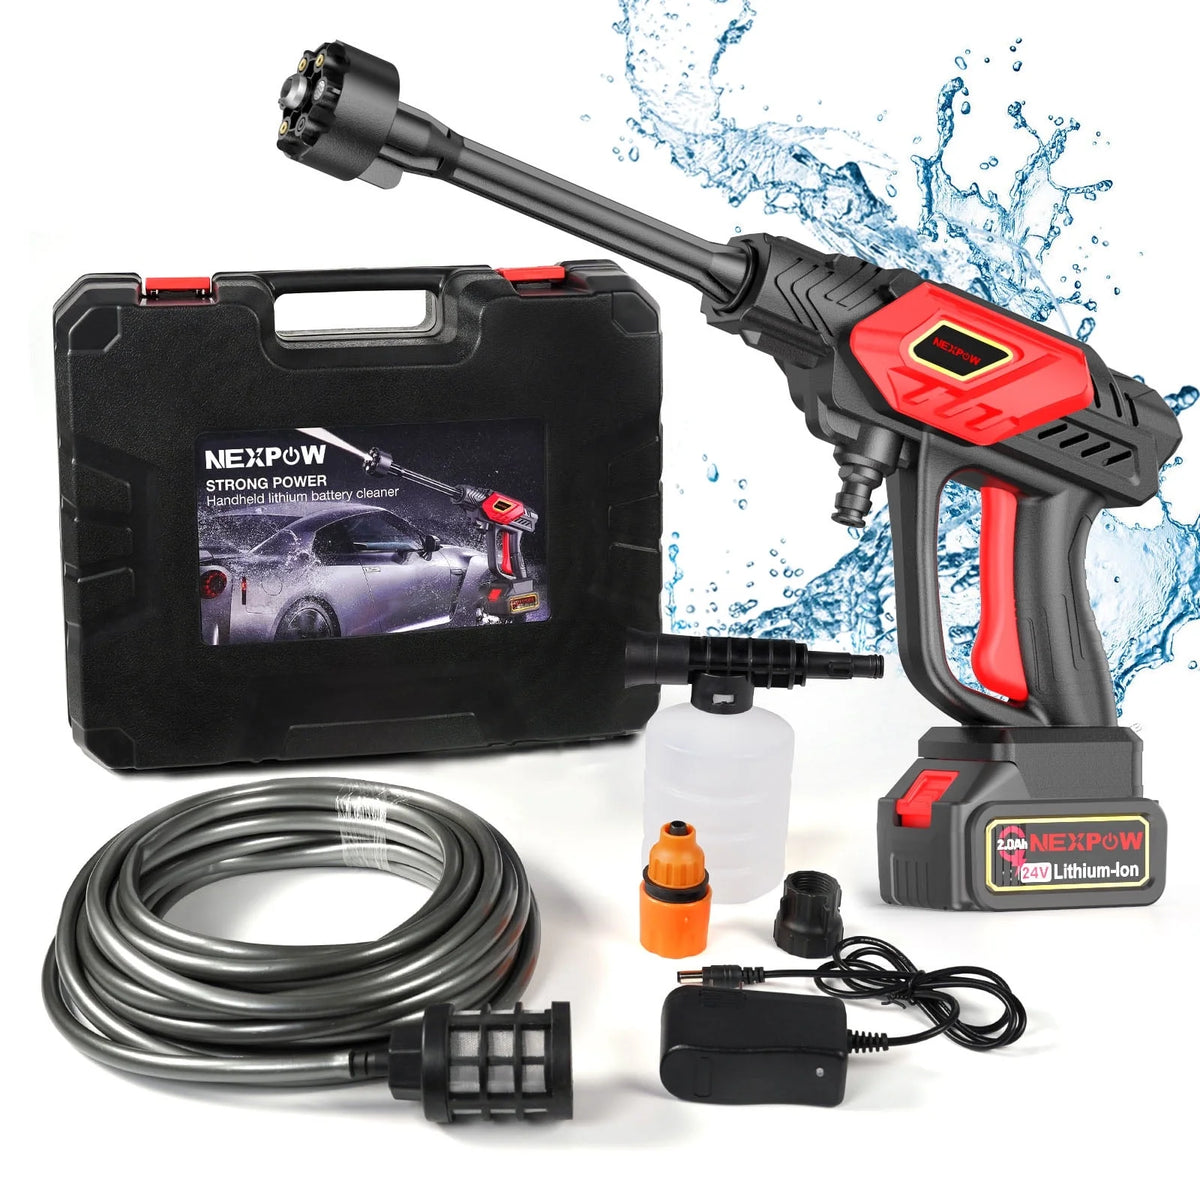 970PSI Cordless Pressure Washer 24V Portable Water Gun with 6-in-1 Nozzle